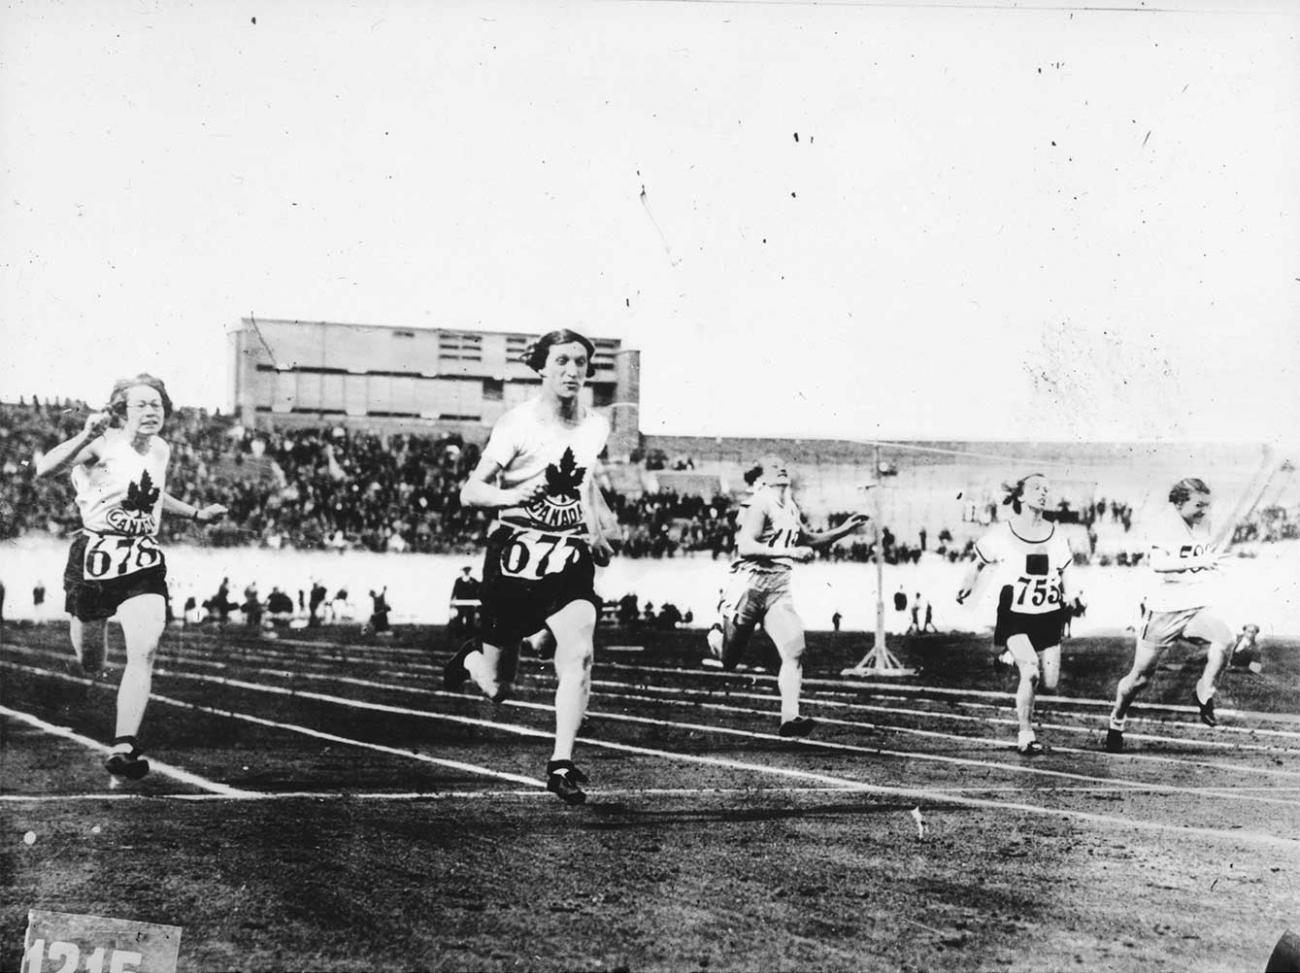 Bobbie Rosenfeld and four other women at the finishing line of a running race.